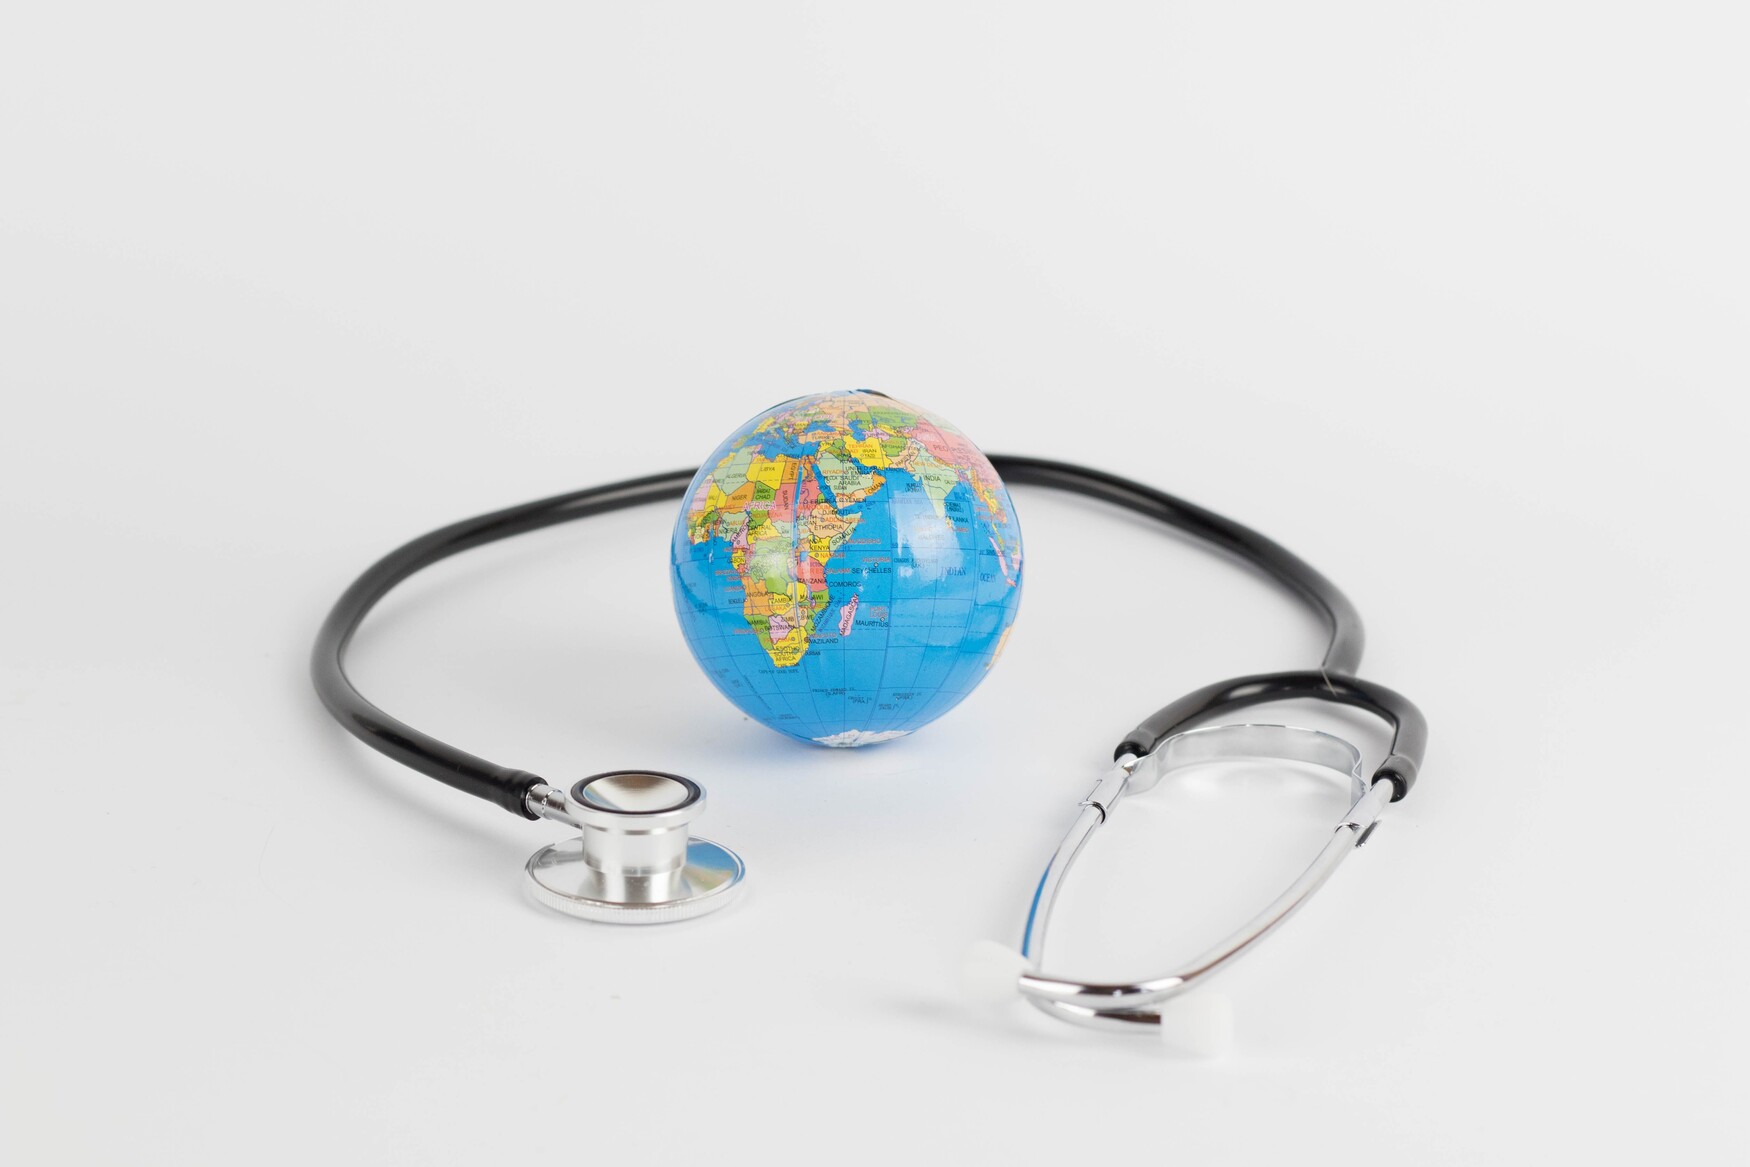 image of a world globe and a stethoscope